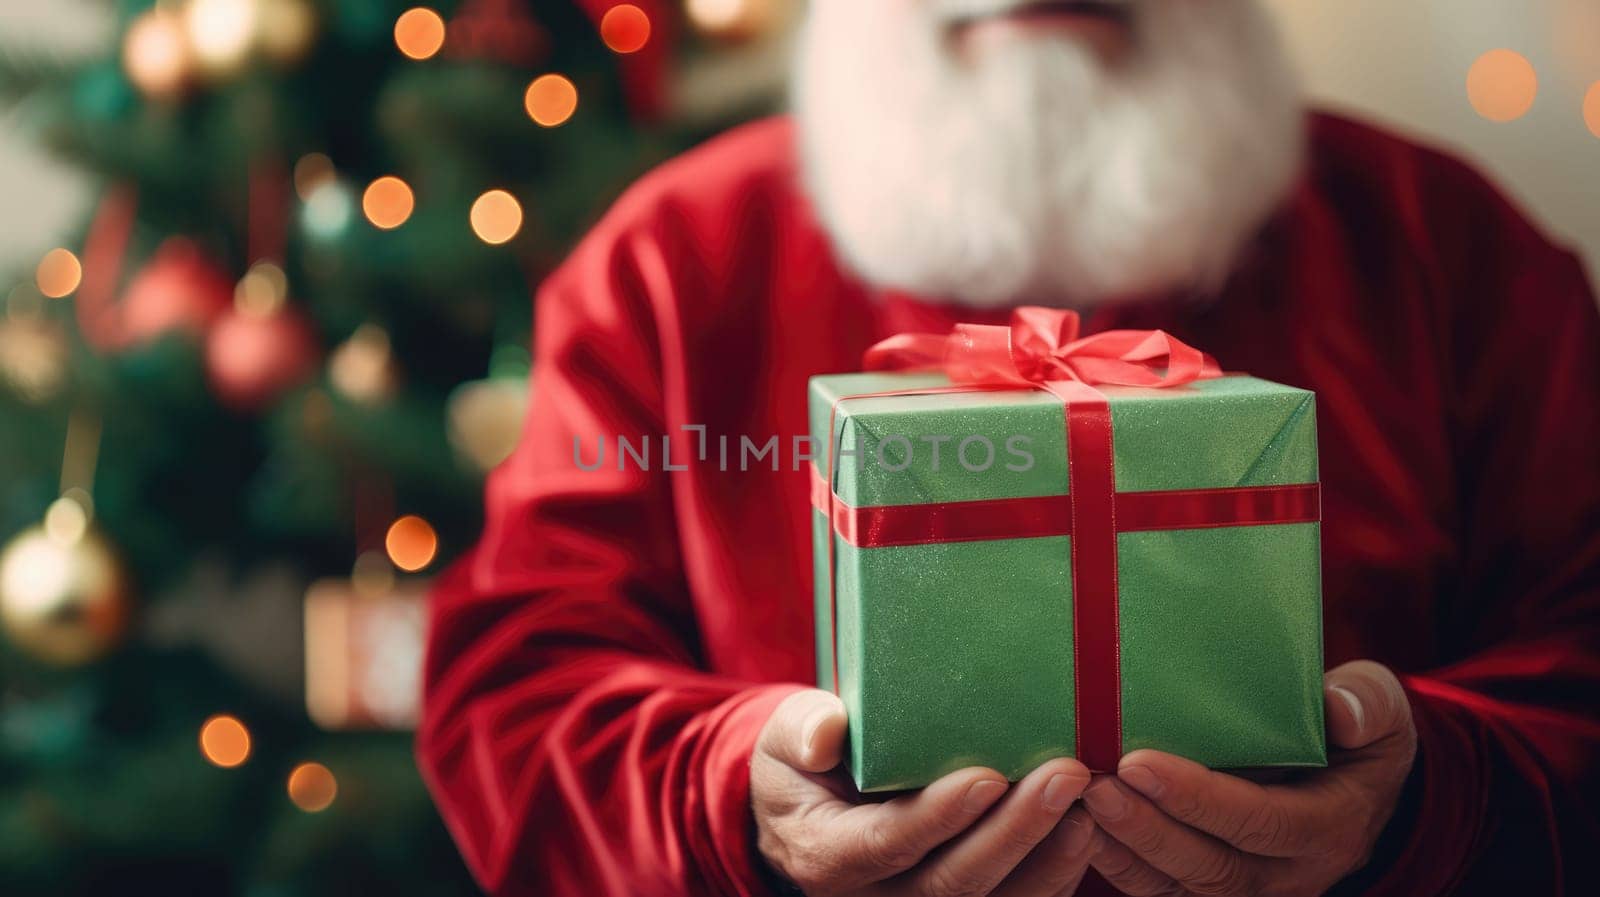 Shot of female hands holding a small gift box. Holidays and celebration concept